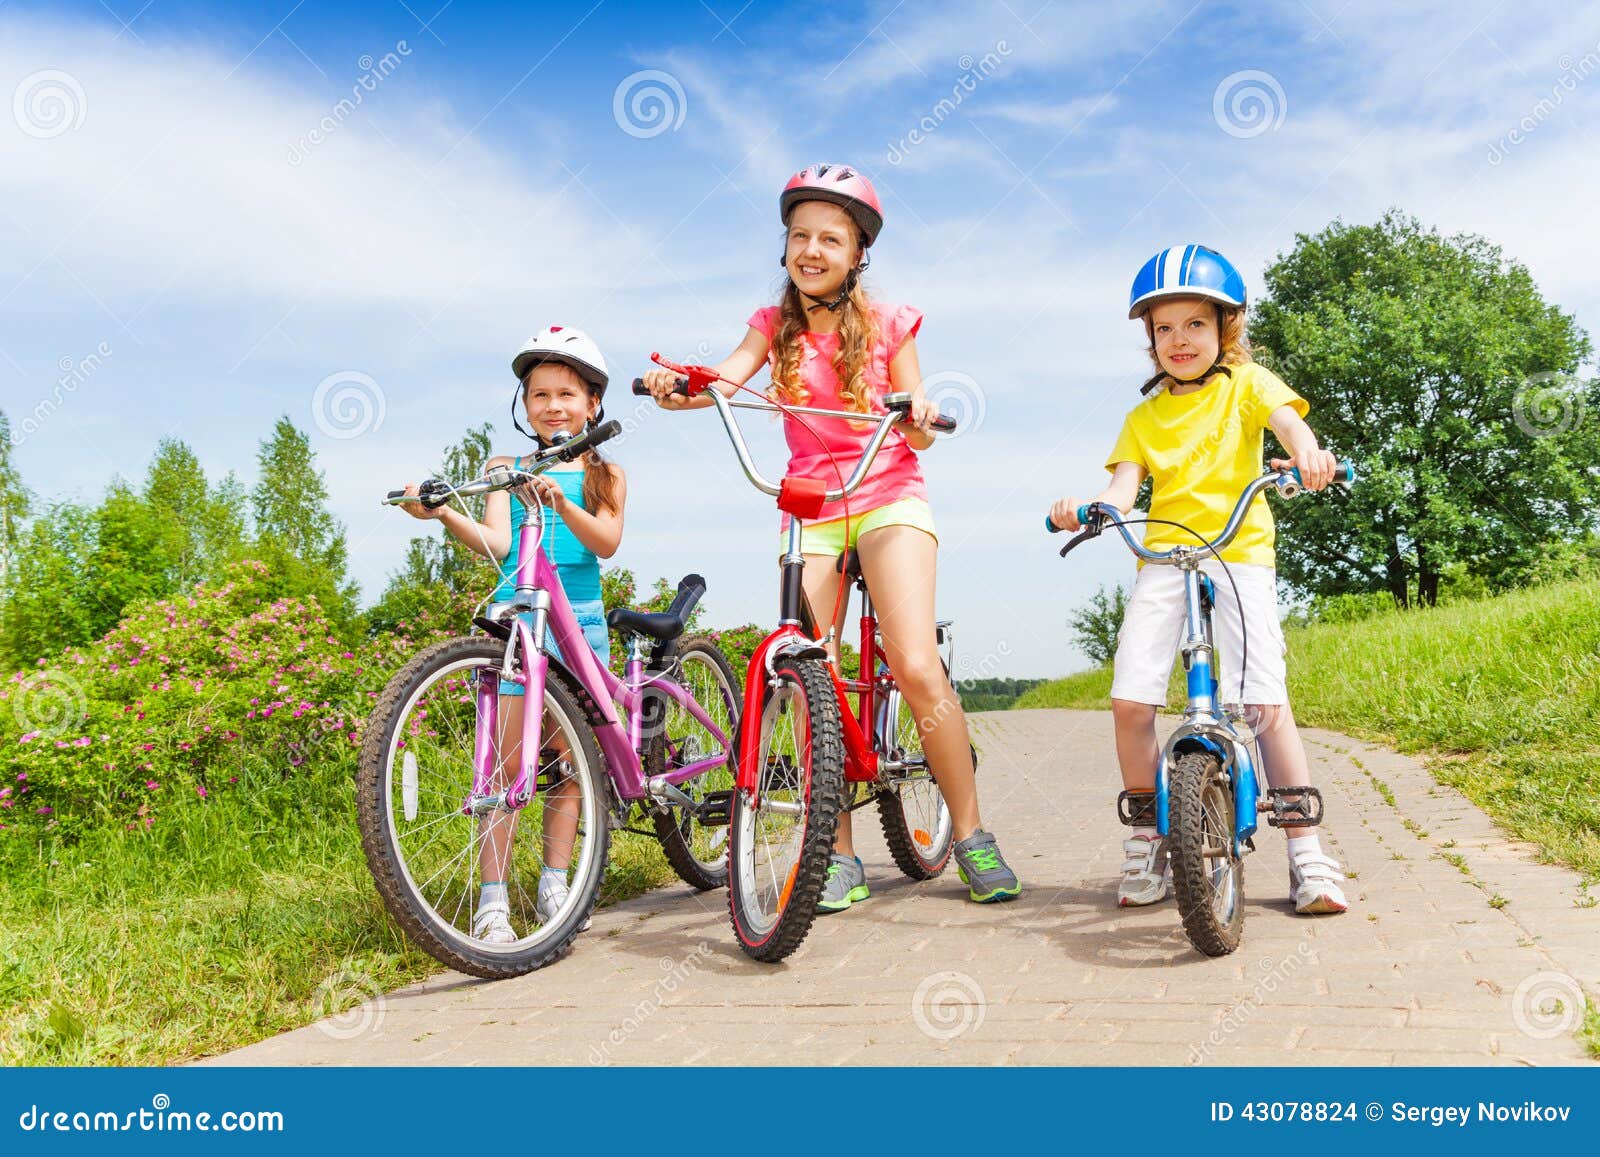 three girls on a pave road with bicycles